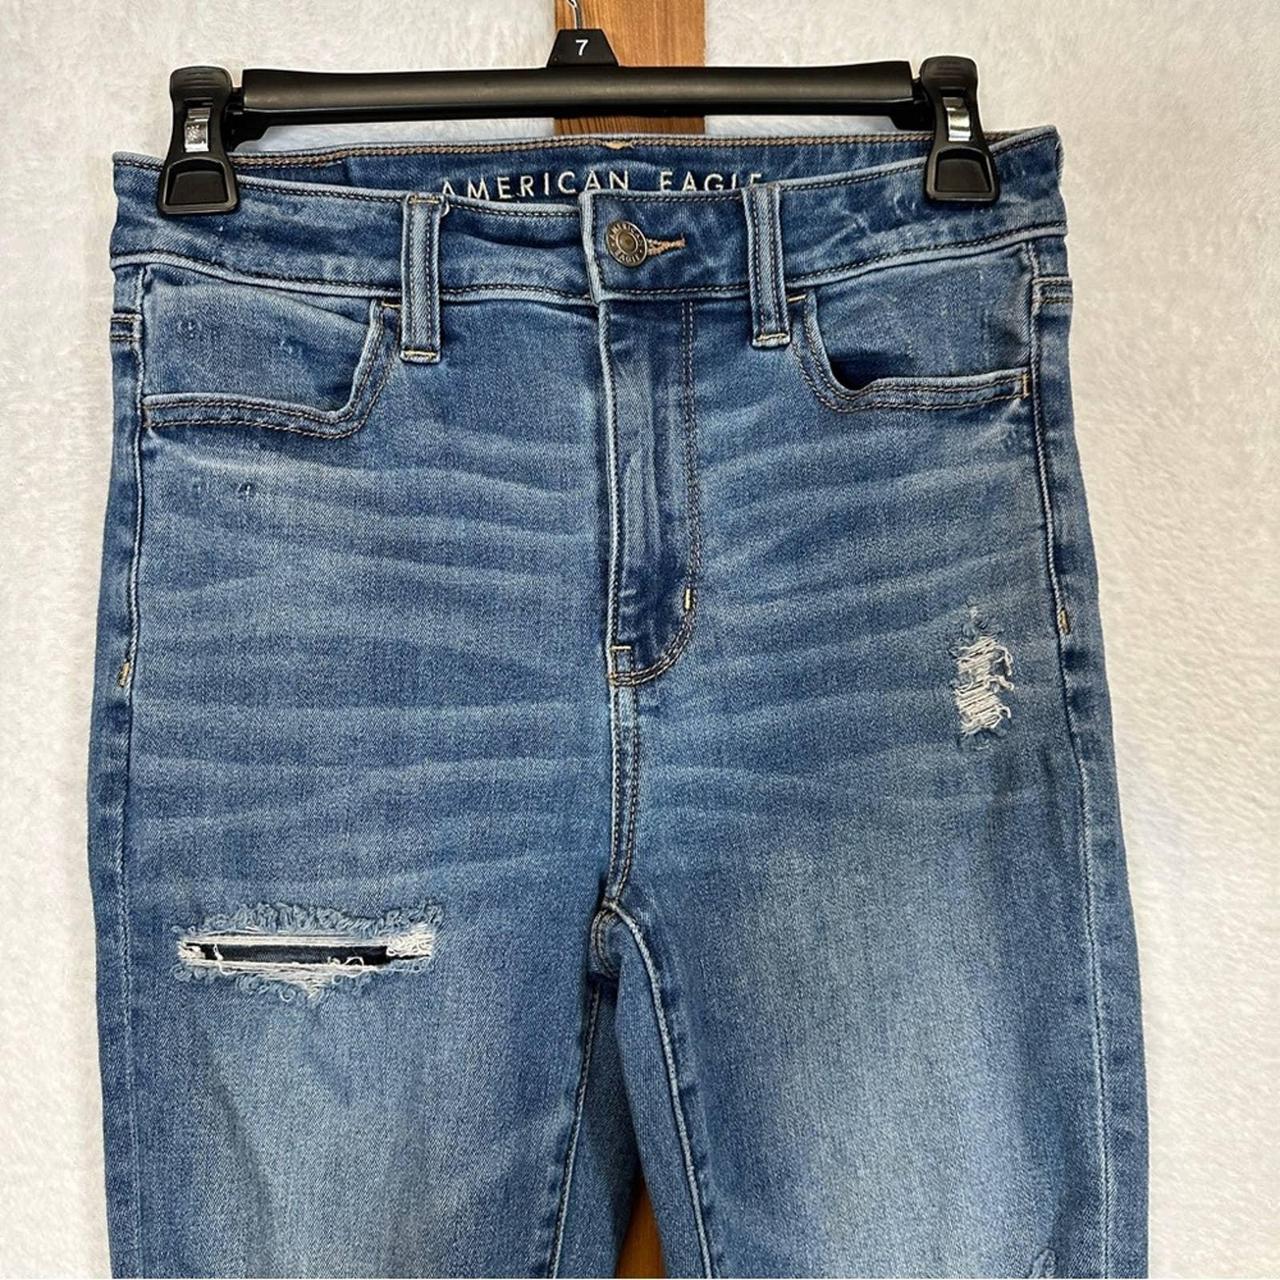 Super High-Waisted Jegging, Super Destroy, American Eagle Outfitters